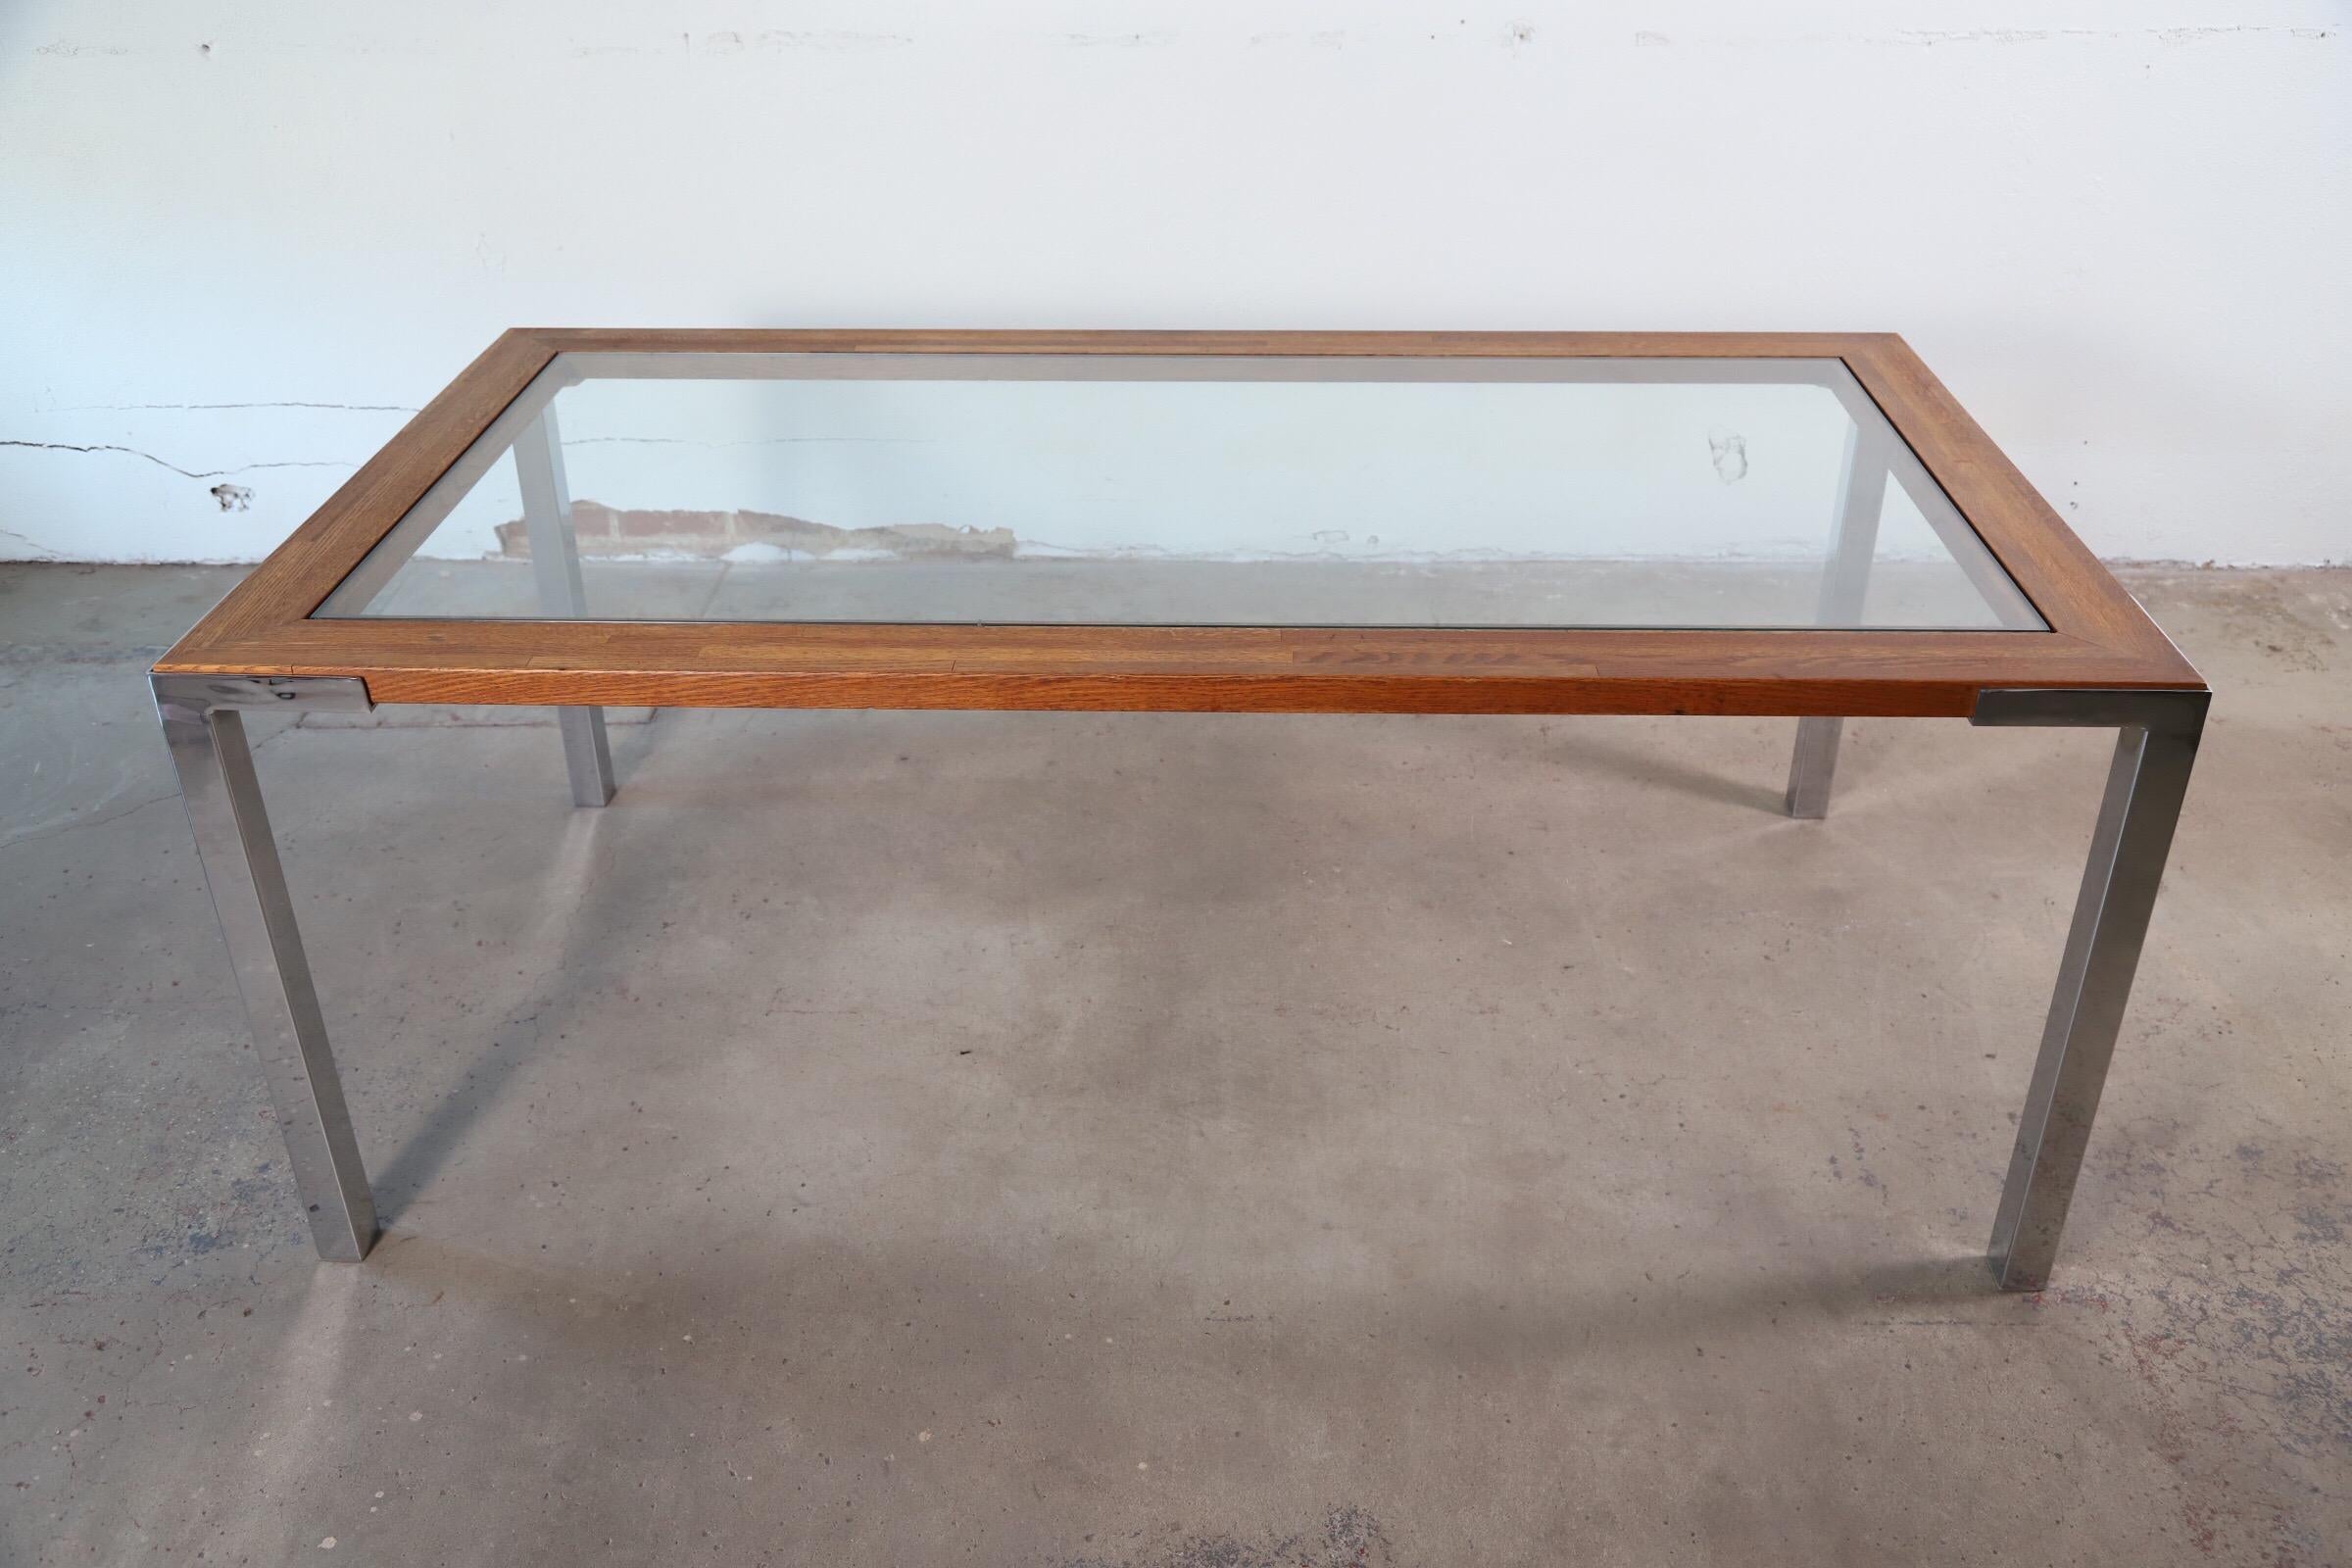 Wonderfully simplistic parsons style 1970s rectangular dining table. Made of glass, wood and chromed steel legs. 

Would make for an amazing executive desk or conference table.